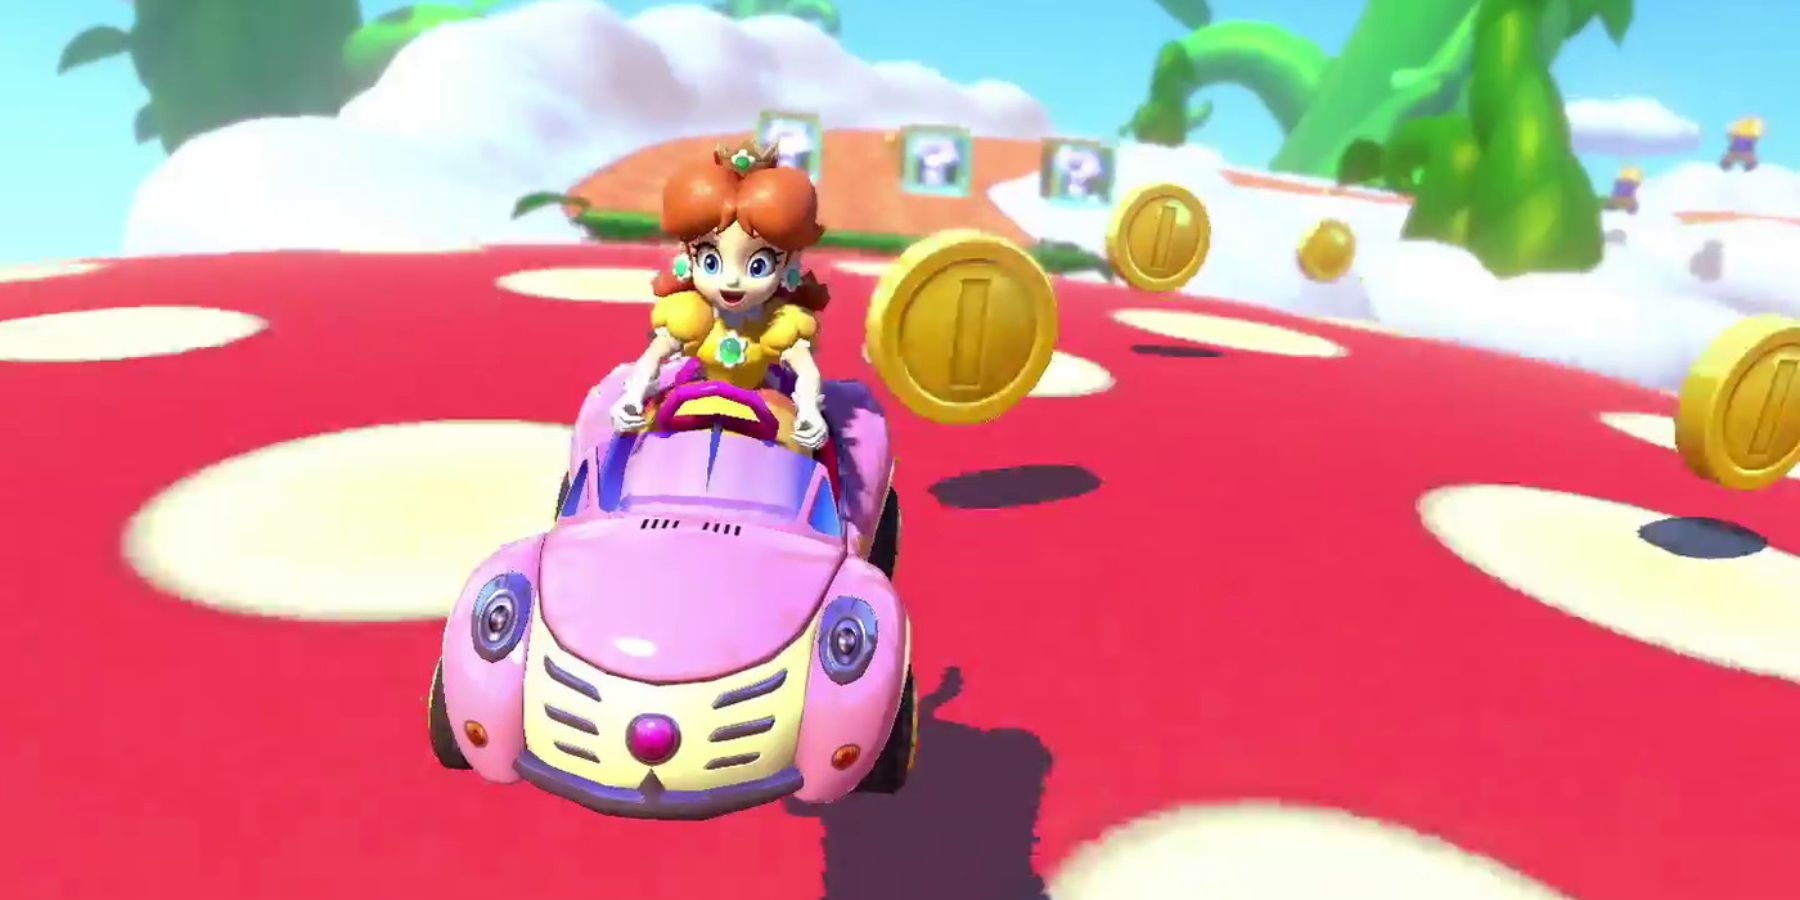 daisy mario kart 8 deluxe expansion